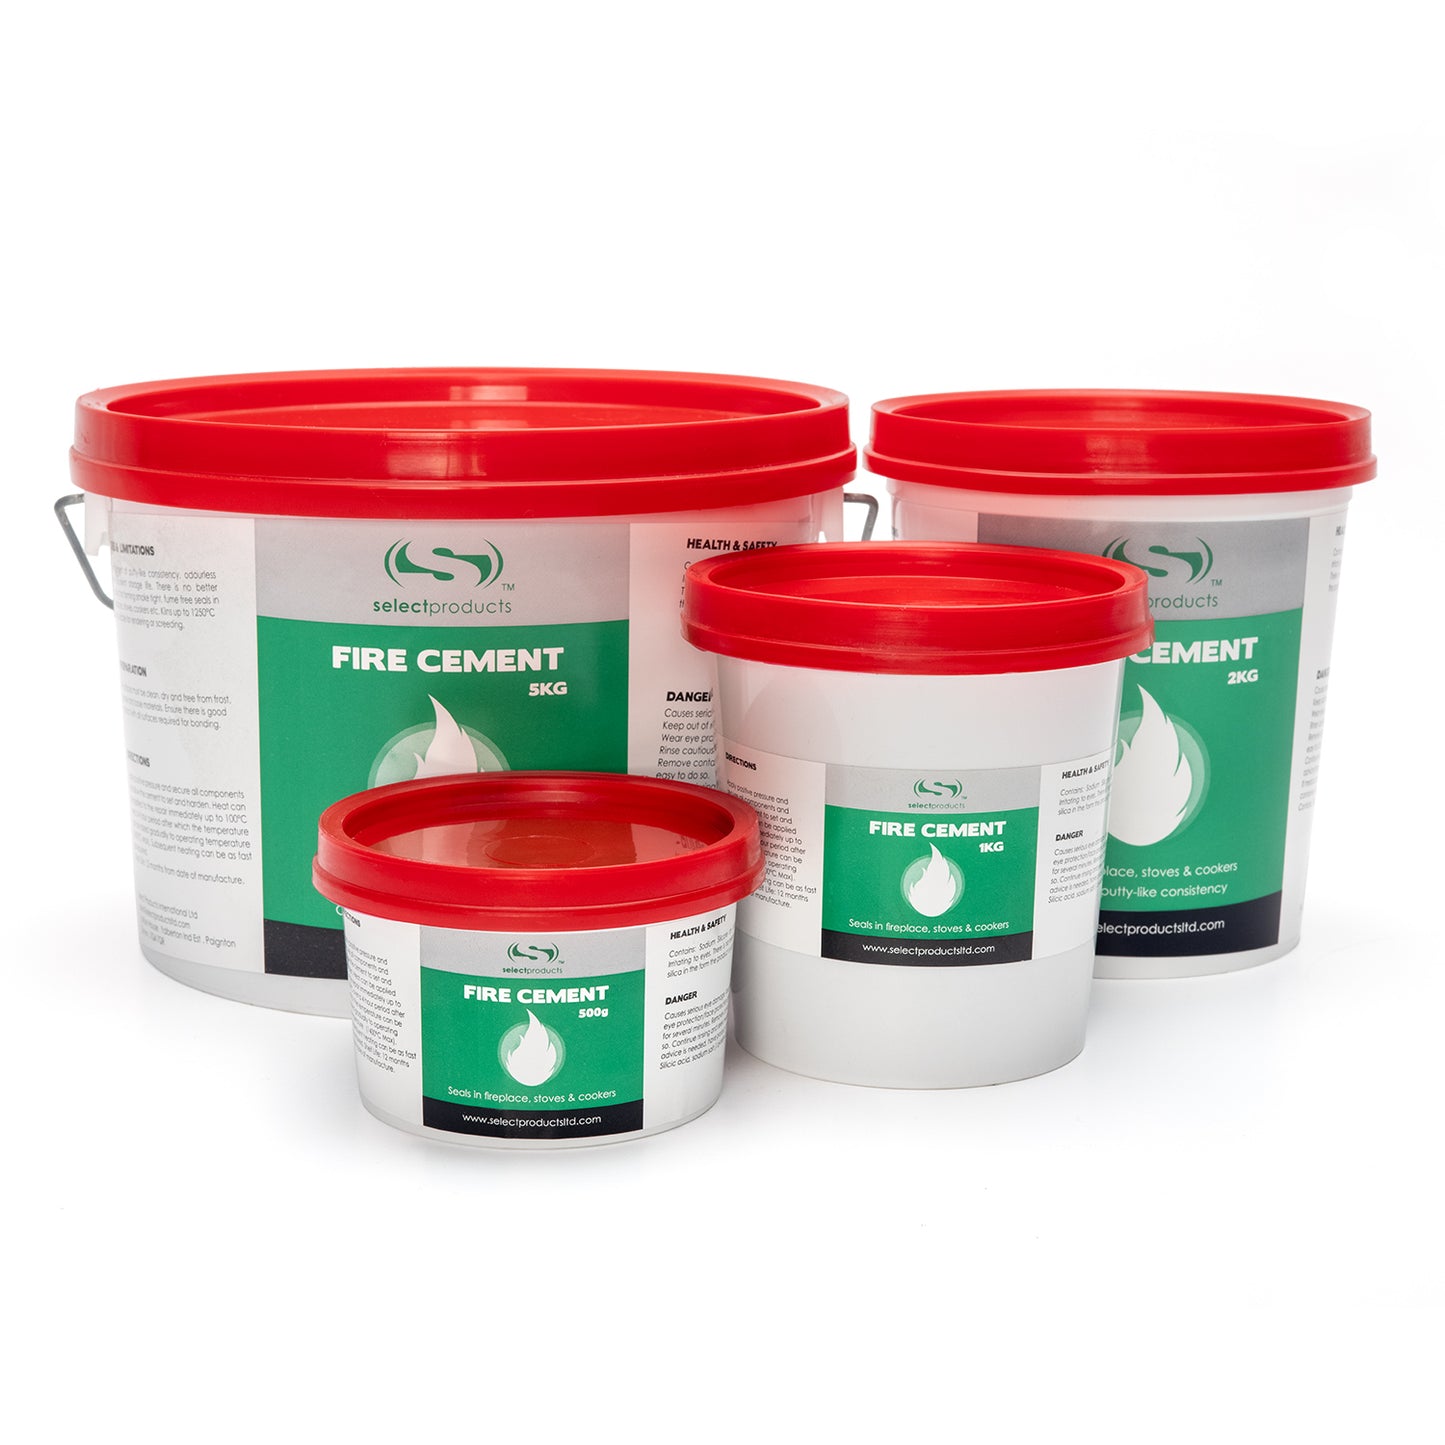 Select Fire Cement For Sealing in Fireplace's, Stove's and Cookers - 2kg Tub